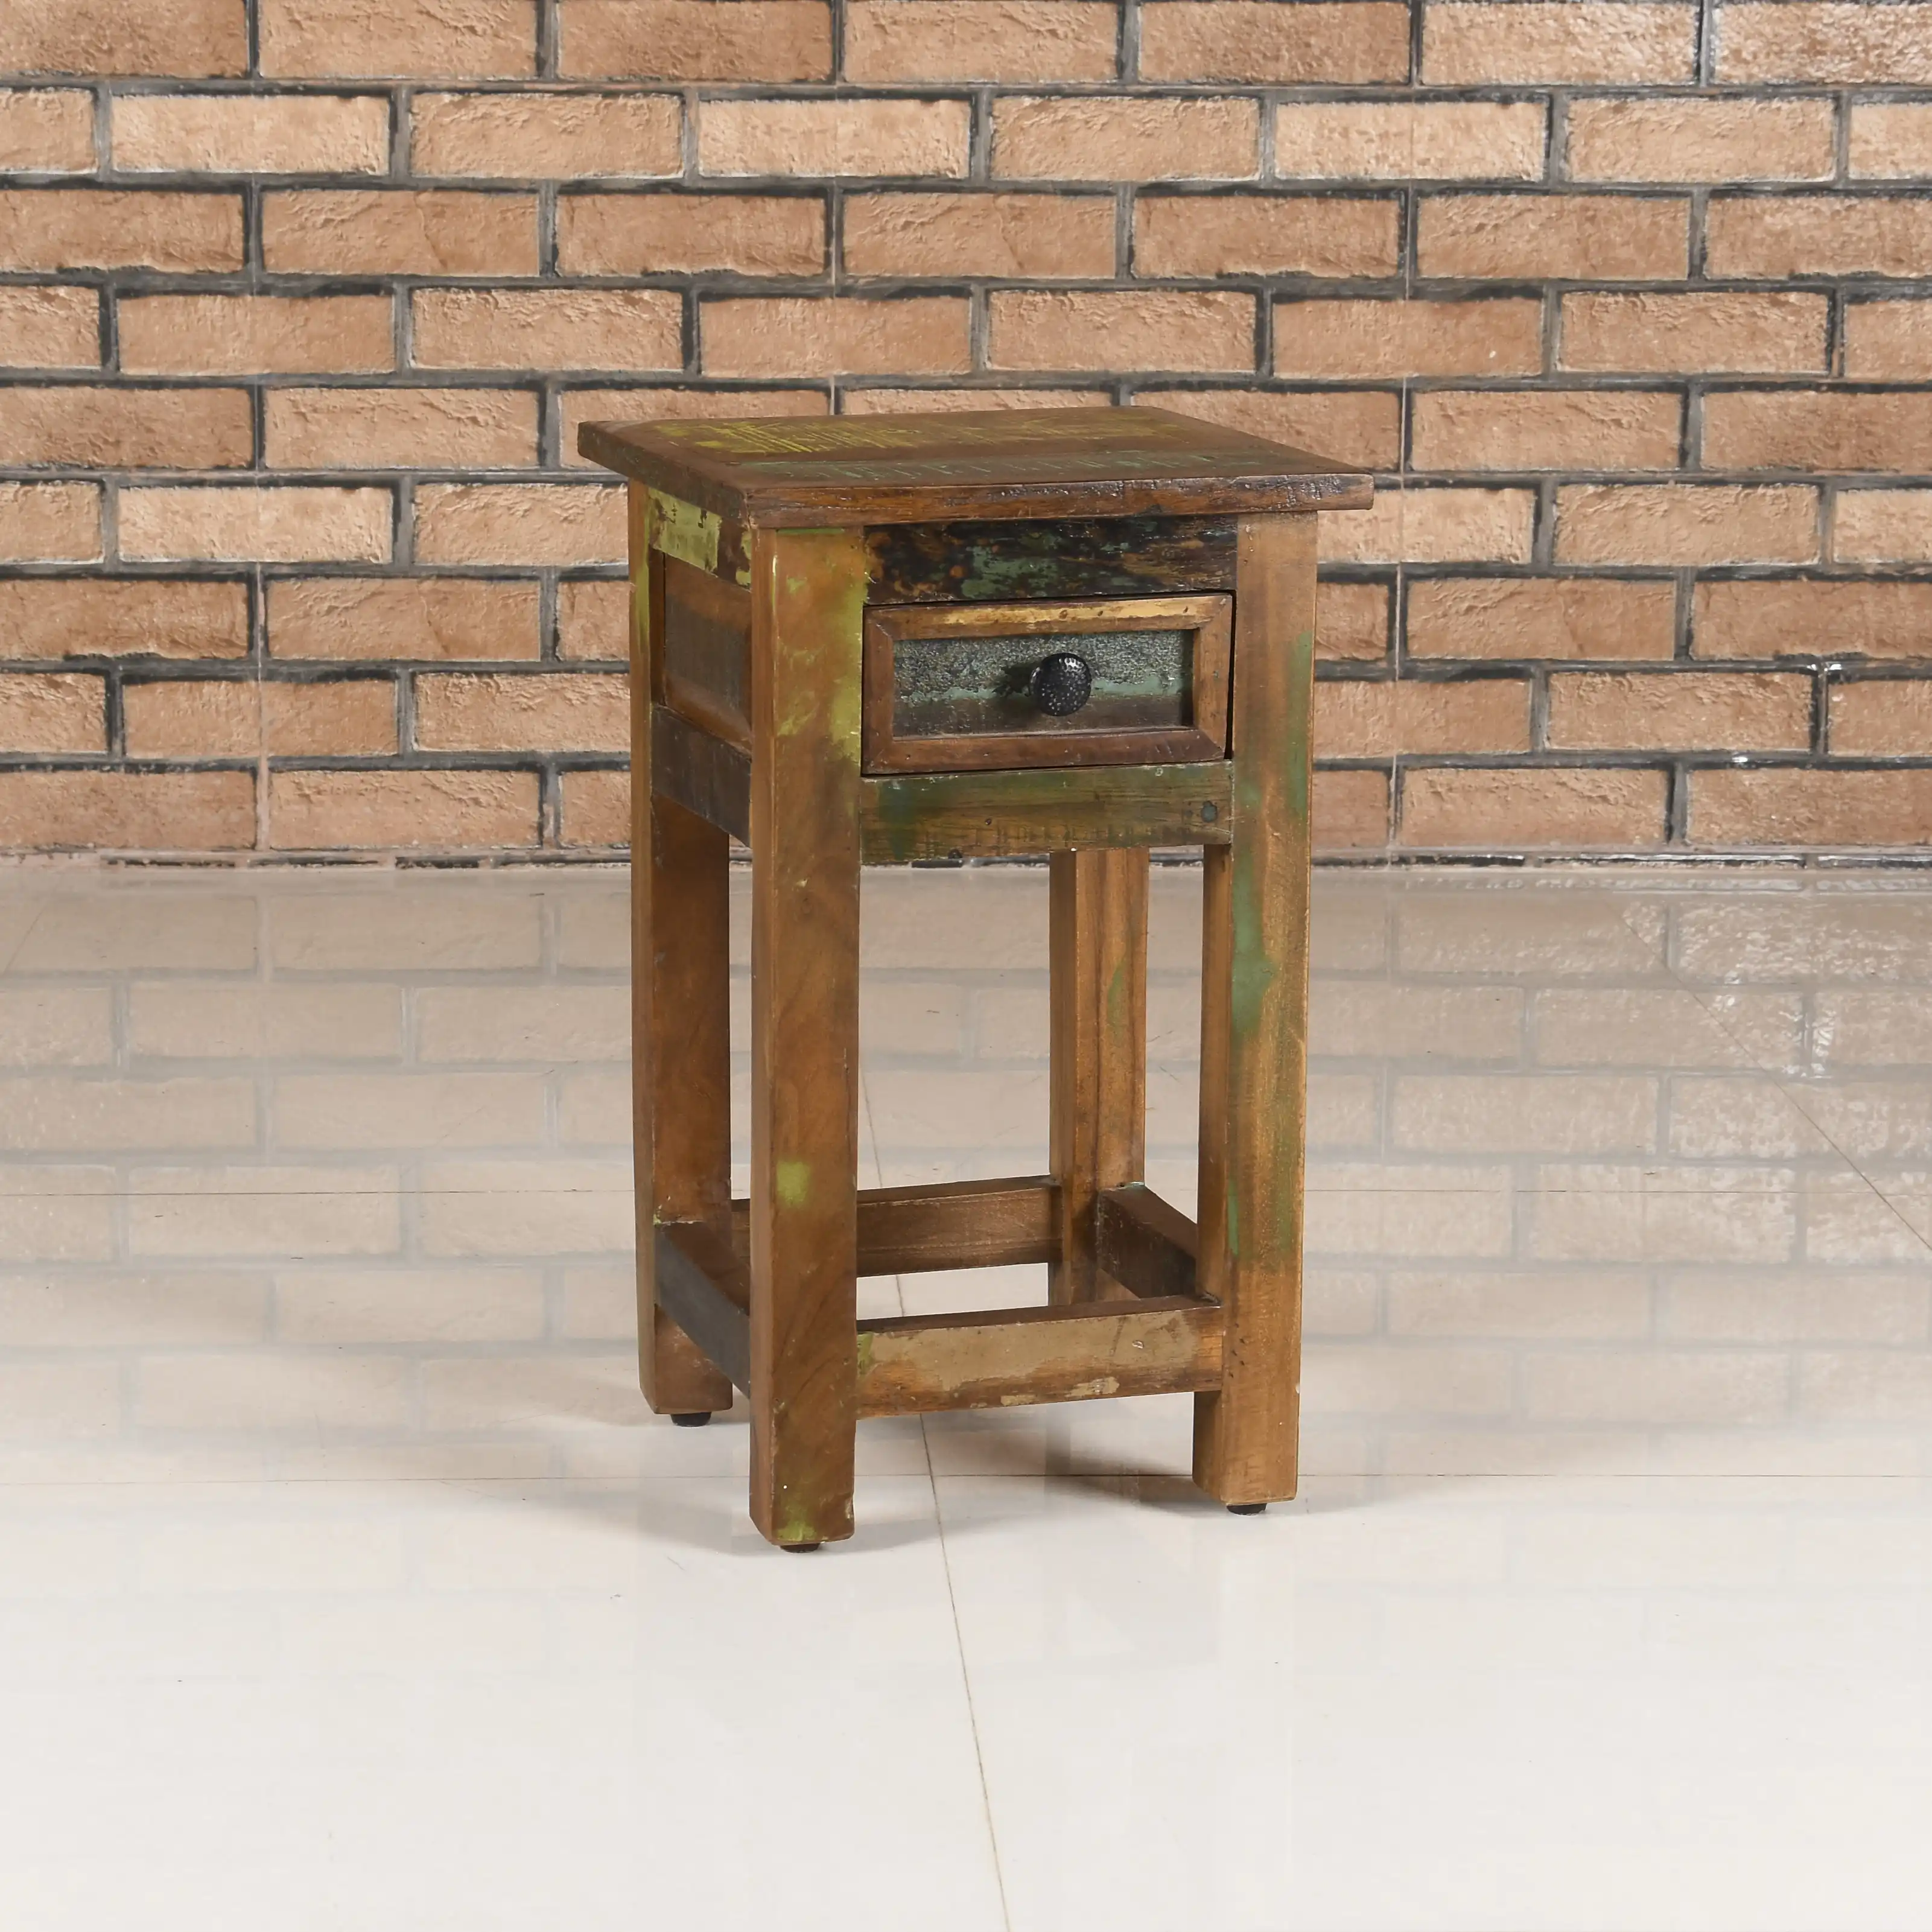 Reclaimed Wood Side Table with 1 Drawer - popular handicrafts